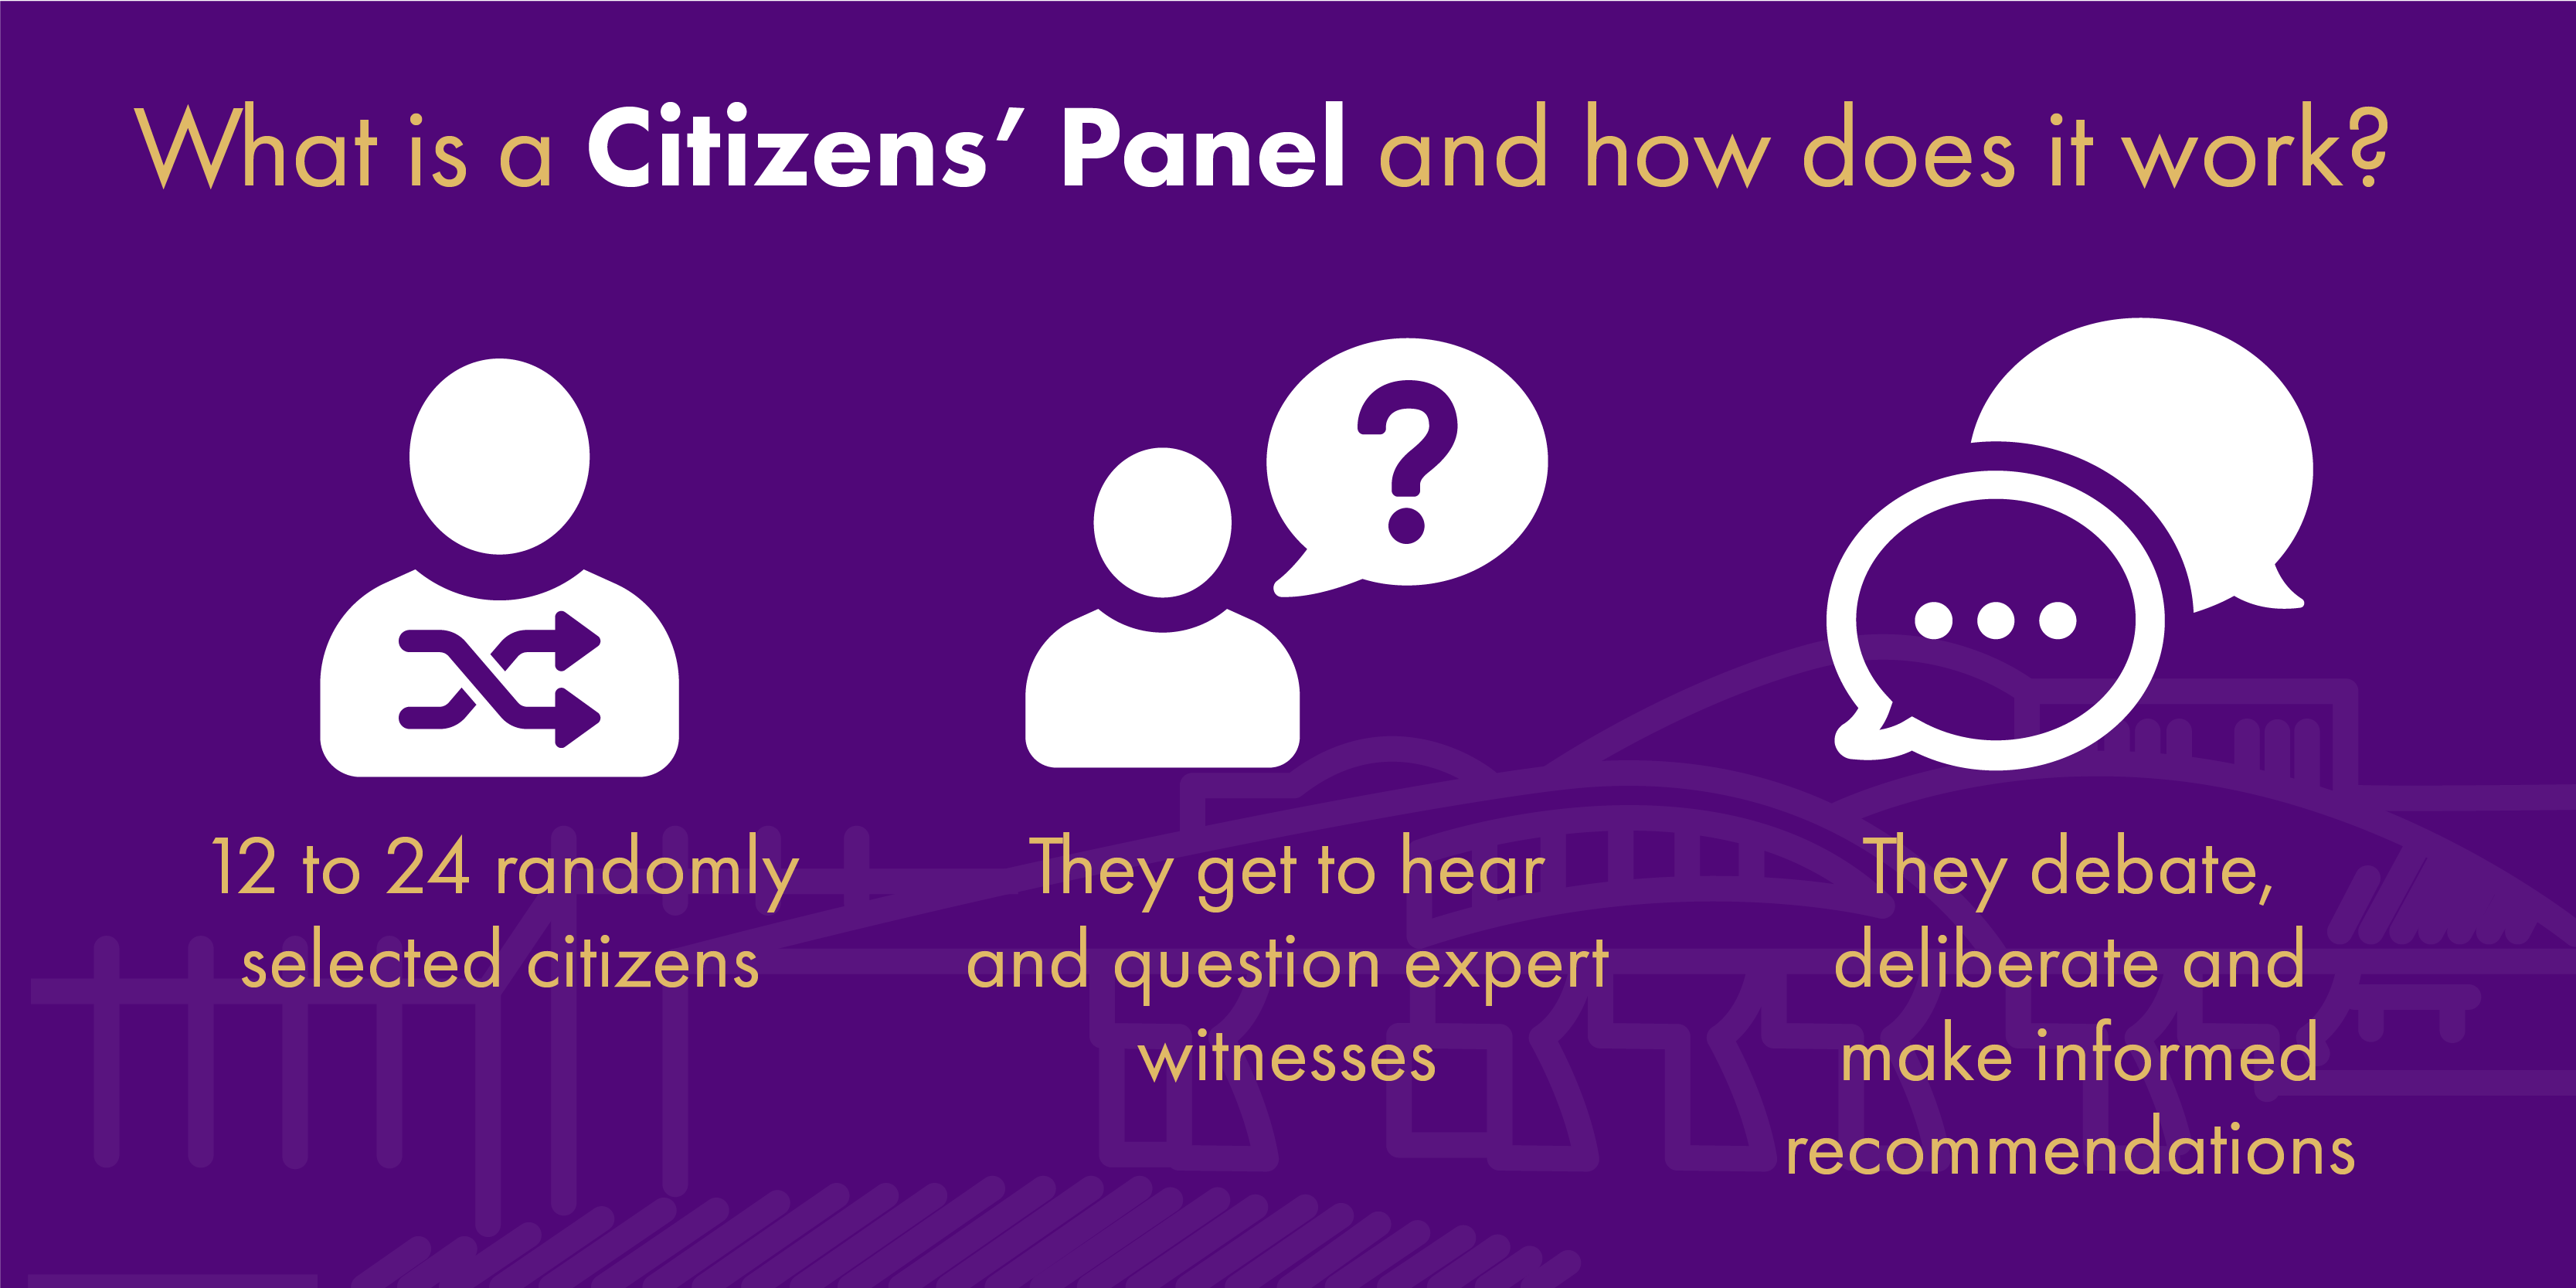 Infographic with the title "What is a Citizens' Panel and how does it work?". On a purple background, there are three white images in a row, with captions below. The first is the head and shoulders of a figure, with arrows that cross over one another marked on its chest, and the caption "12 to 24 randomly selected citizens". The second image is a figure with a speech bubble coming from it's mouth, the bubble contains a question mark, and the caption below reads "They get to hear and question expert witnesses". The third image is two overlapping speech bubbles, coming from different directions to suggest people talking to one another. The bubble on top contains an ellipsis (three dots), and the caption reads "They debate, deliberate and make informed recommendations".